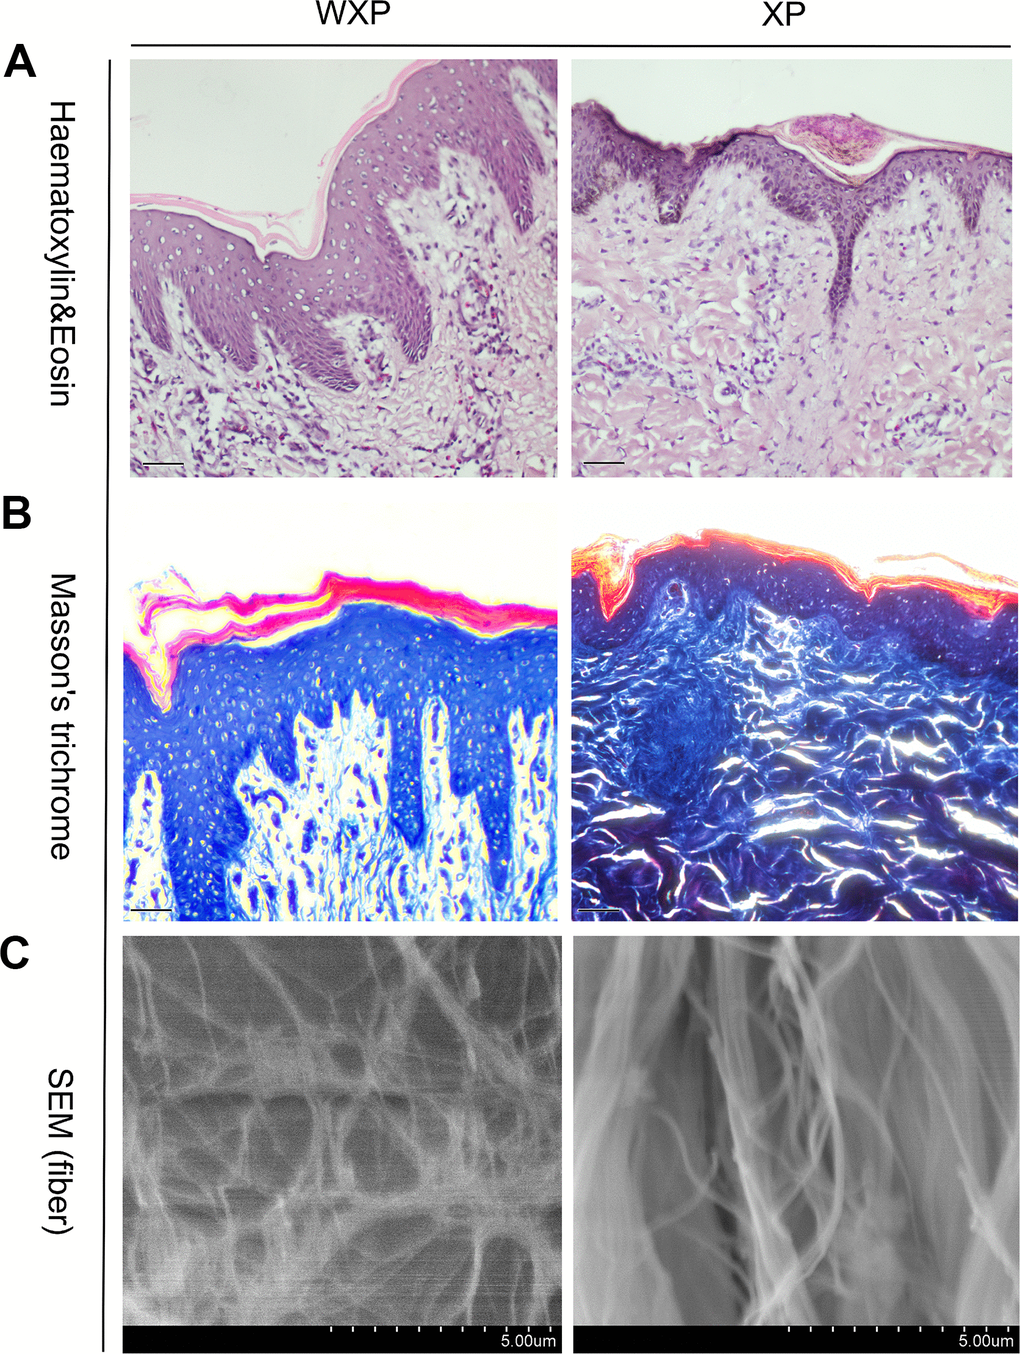 Skin histological features abnormal in Xiang pigs with systemic wrinkle (WXP). Representative Haematoxylin and Eosin and Masson's trichrome-stained skin sections of WXP and XP. And scanning electron microscope to observed the collagen fiber structure of the dermis. Scale bars: 50 μm in (A, B) and 5 μm in (C).